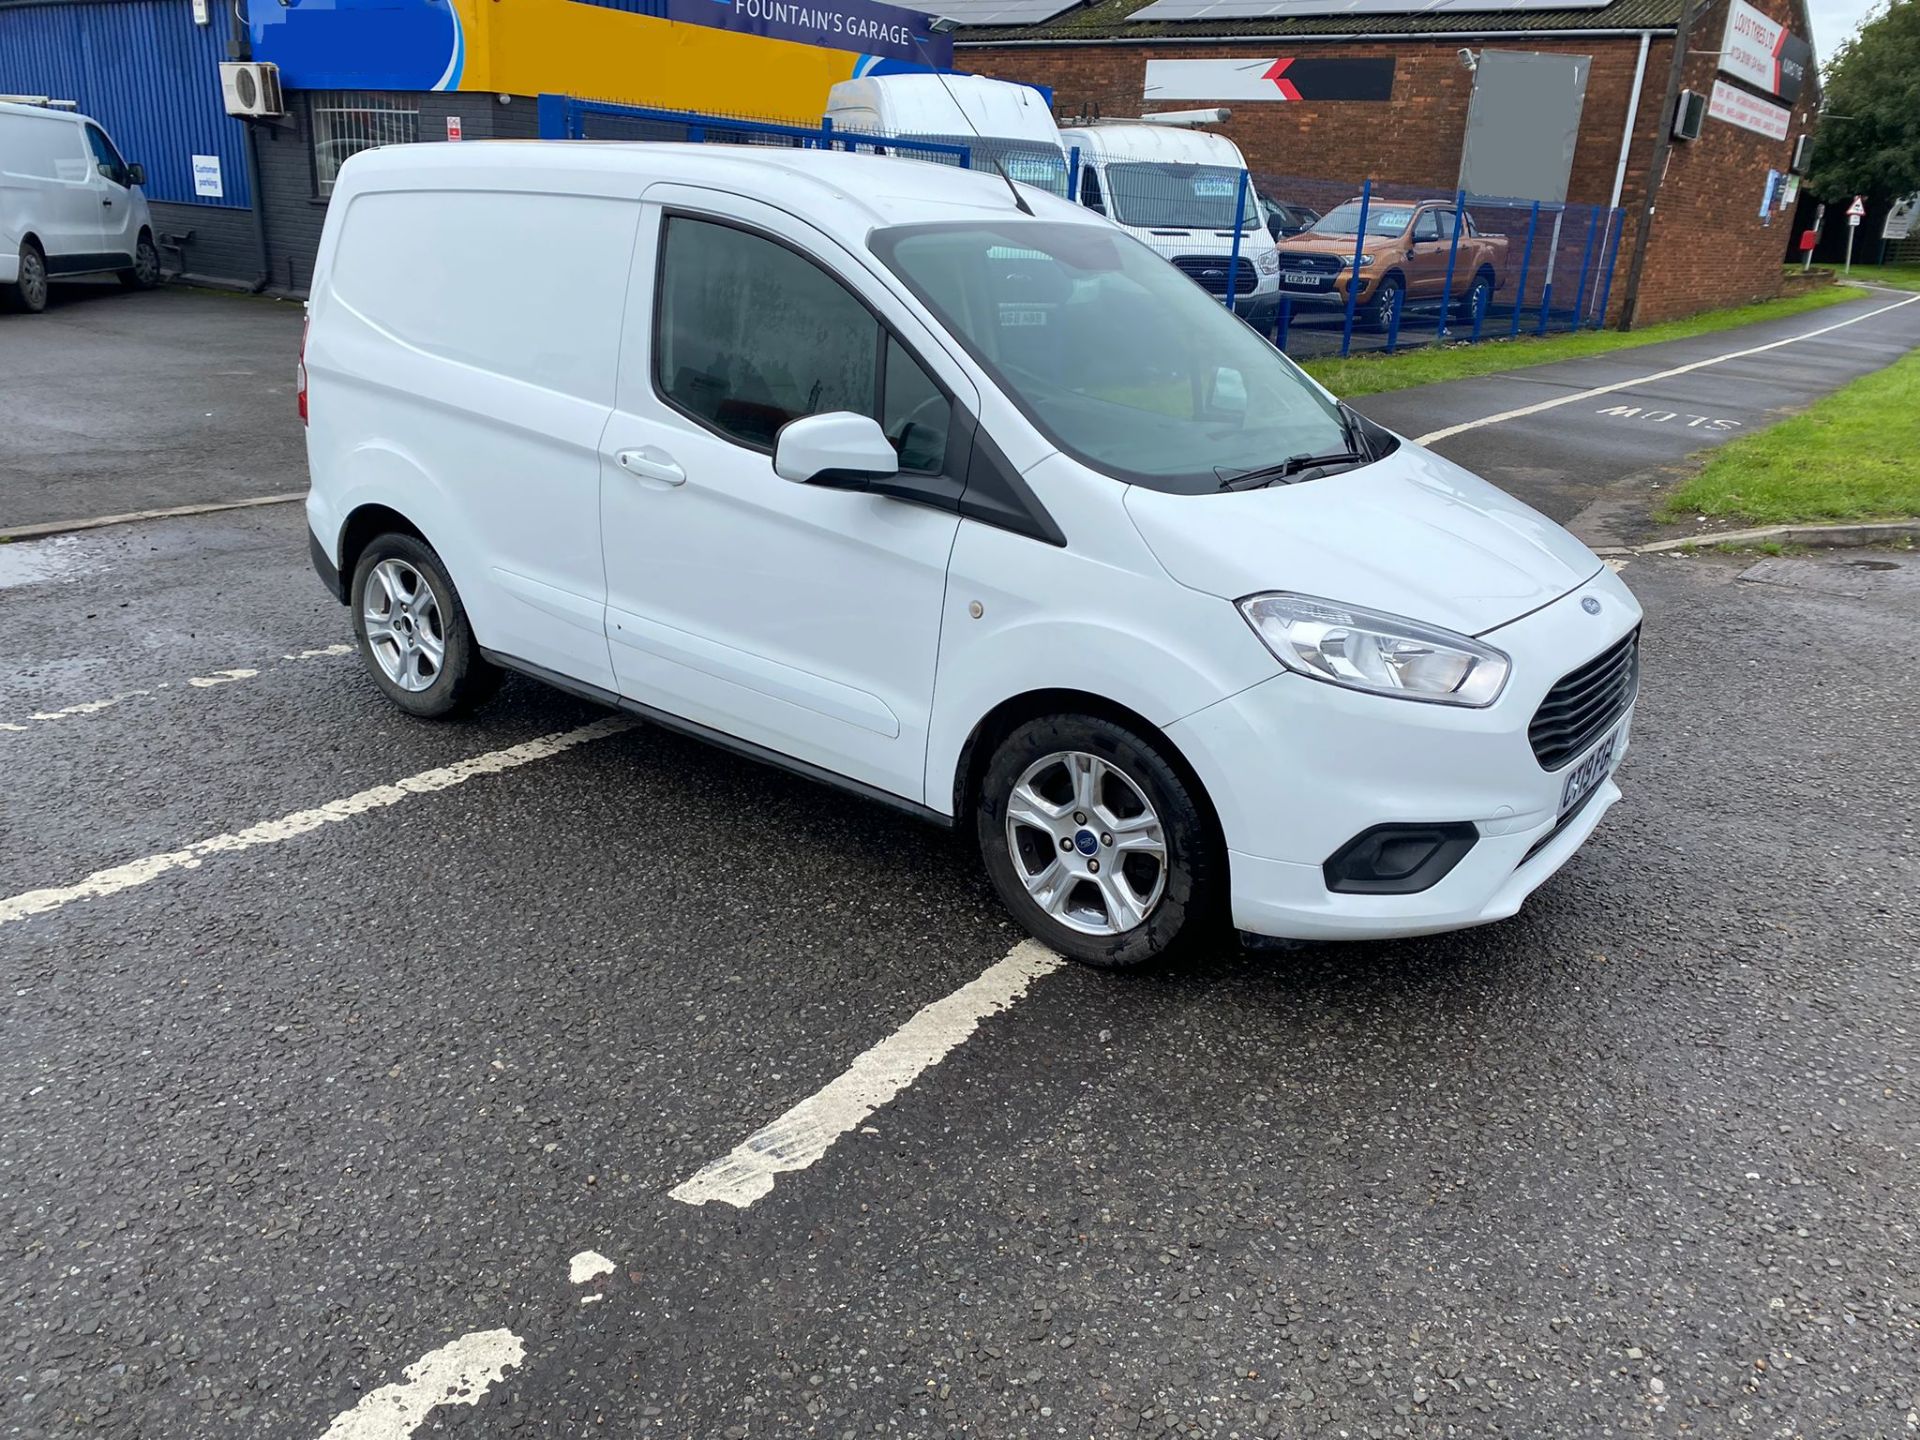 2019 19 FORD TRANSIT COURIER LIMITED PANEL VAN - ALLOY WHEELS - AIR CON - EURO 6.